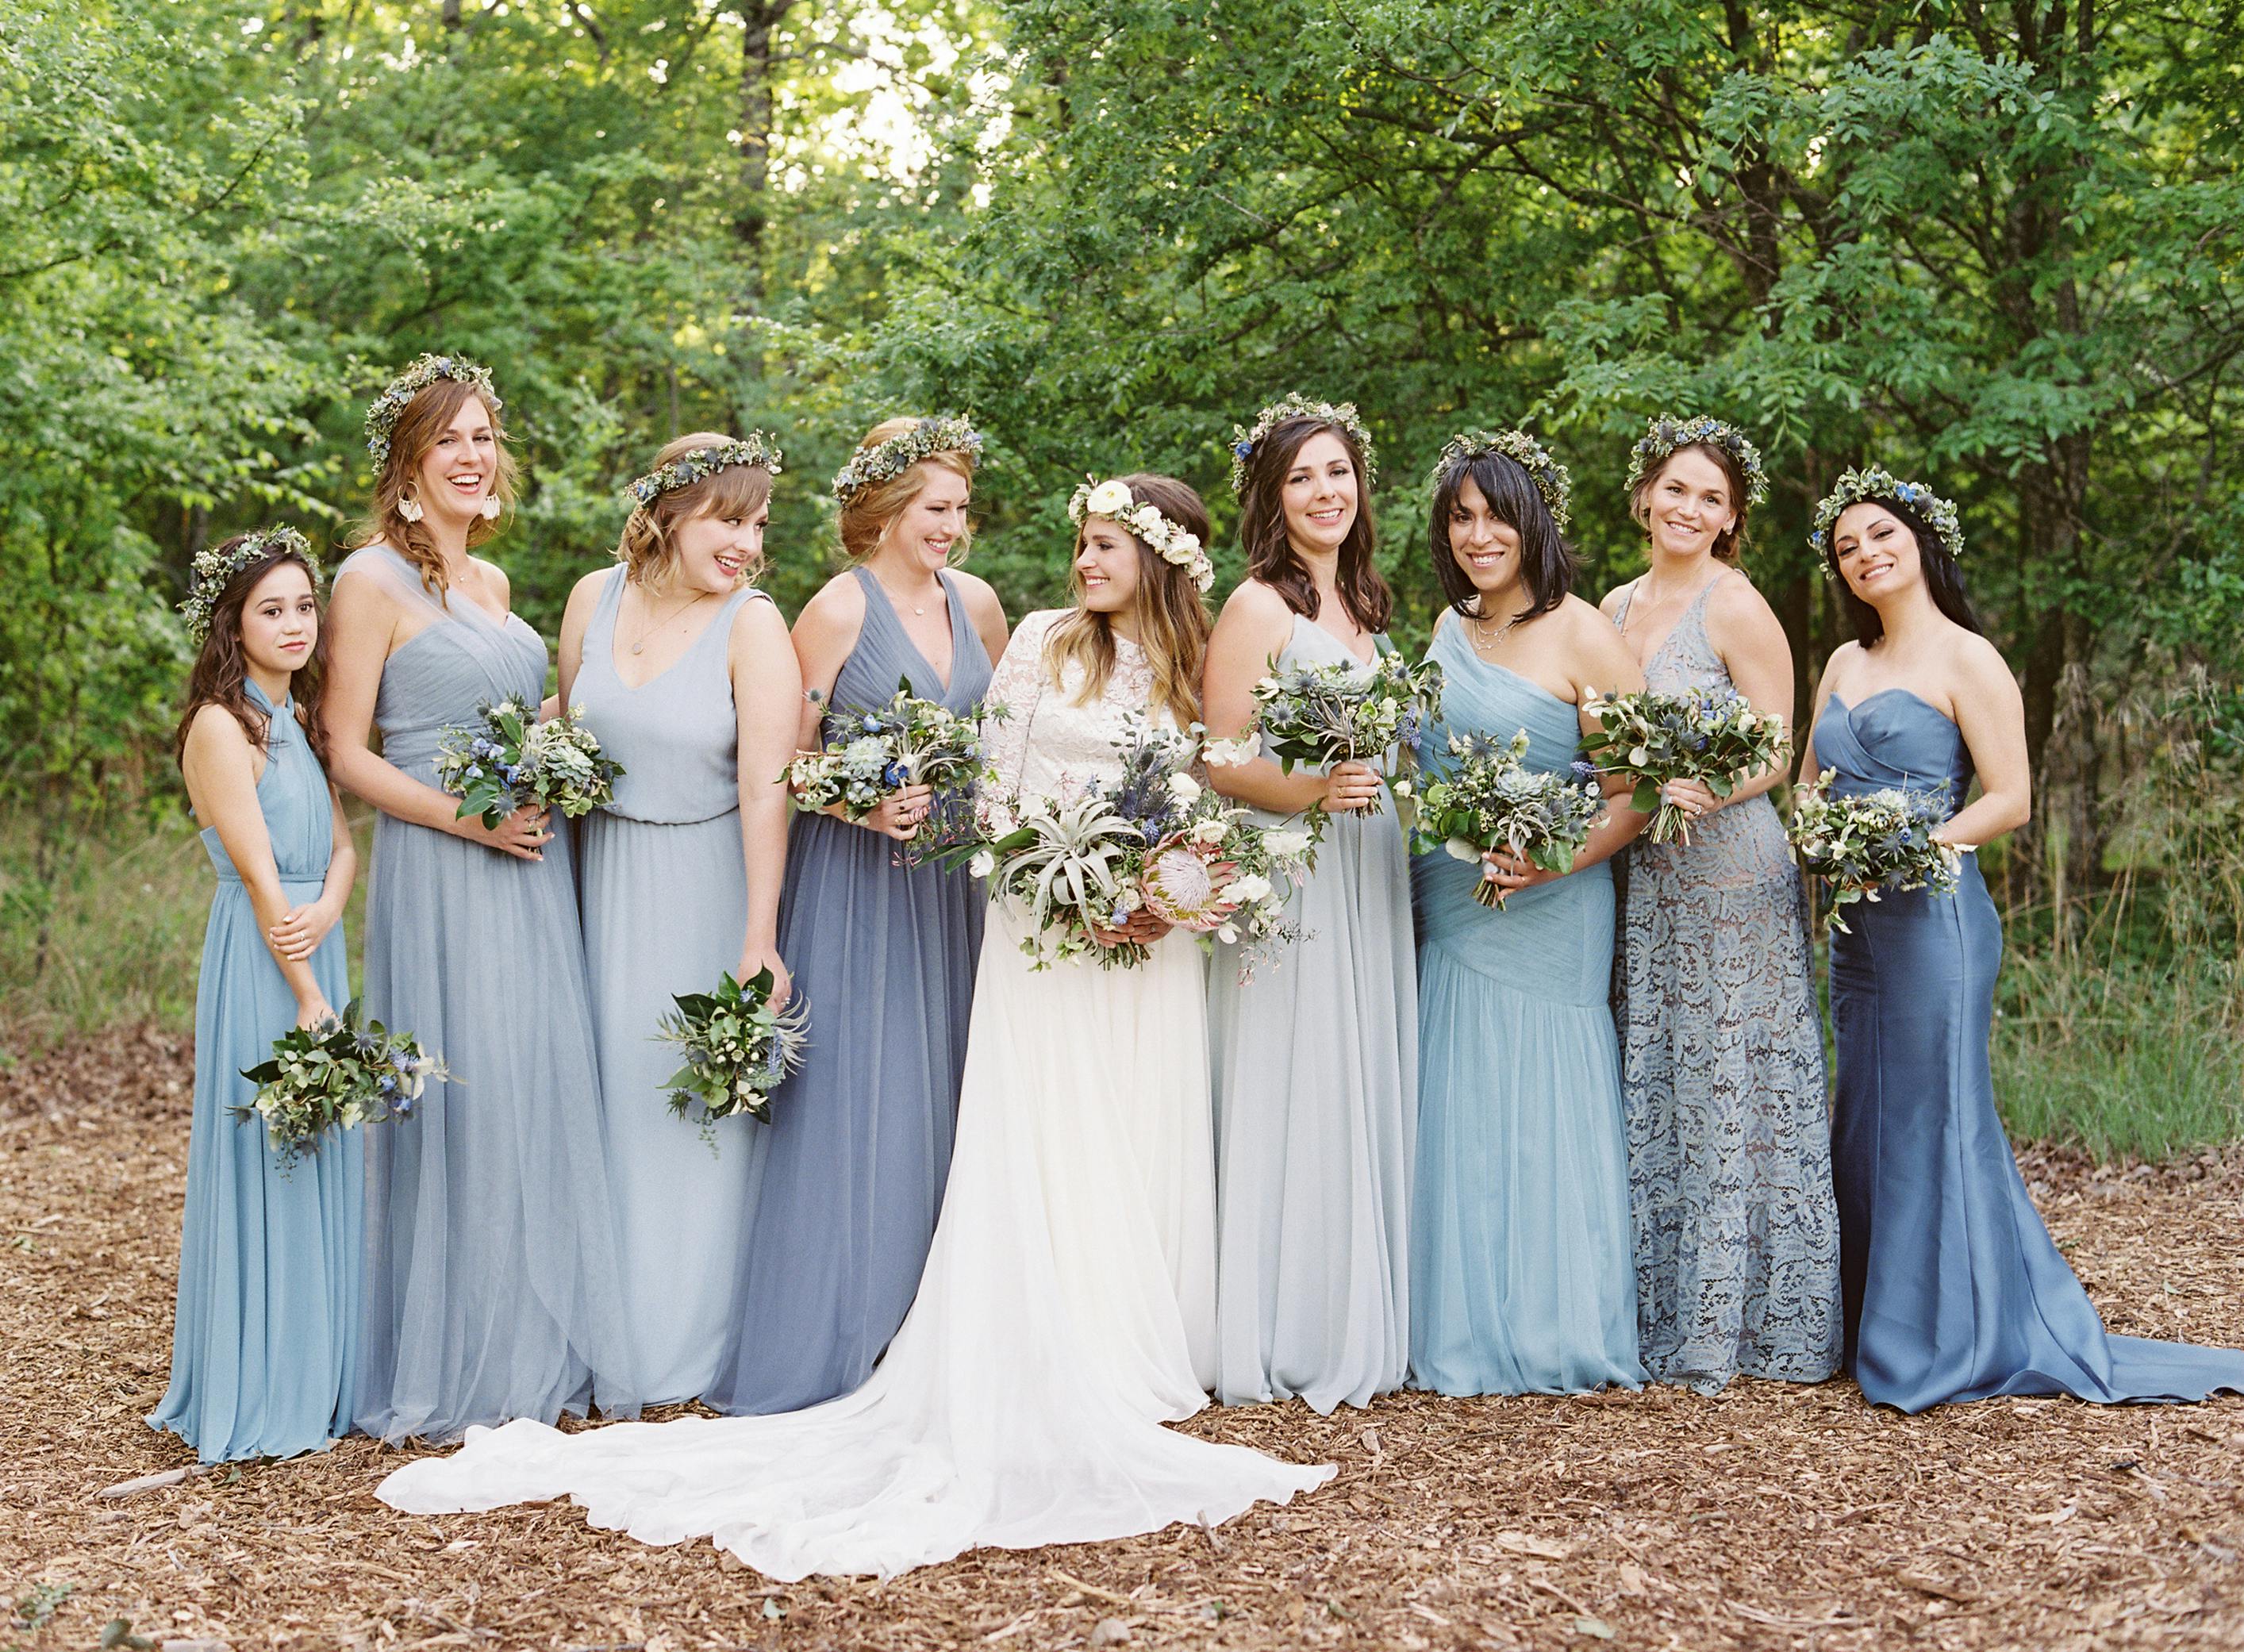 Boho-Inspired Wedding at The Grove in Denton, TX with Bridesmaids and Bride Wearing Blue Spring Wedding Colors | PartySlate